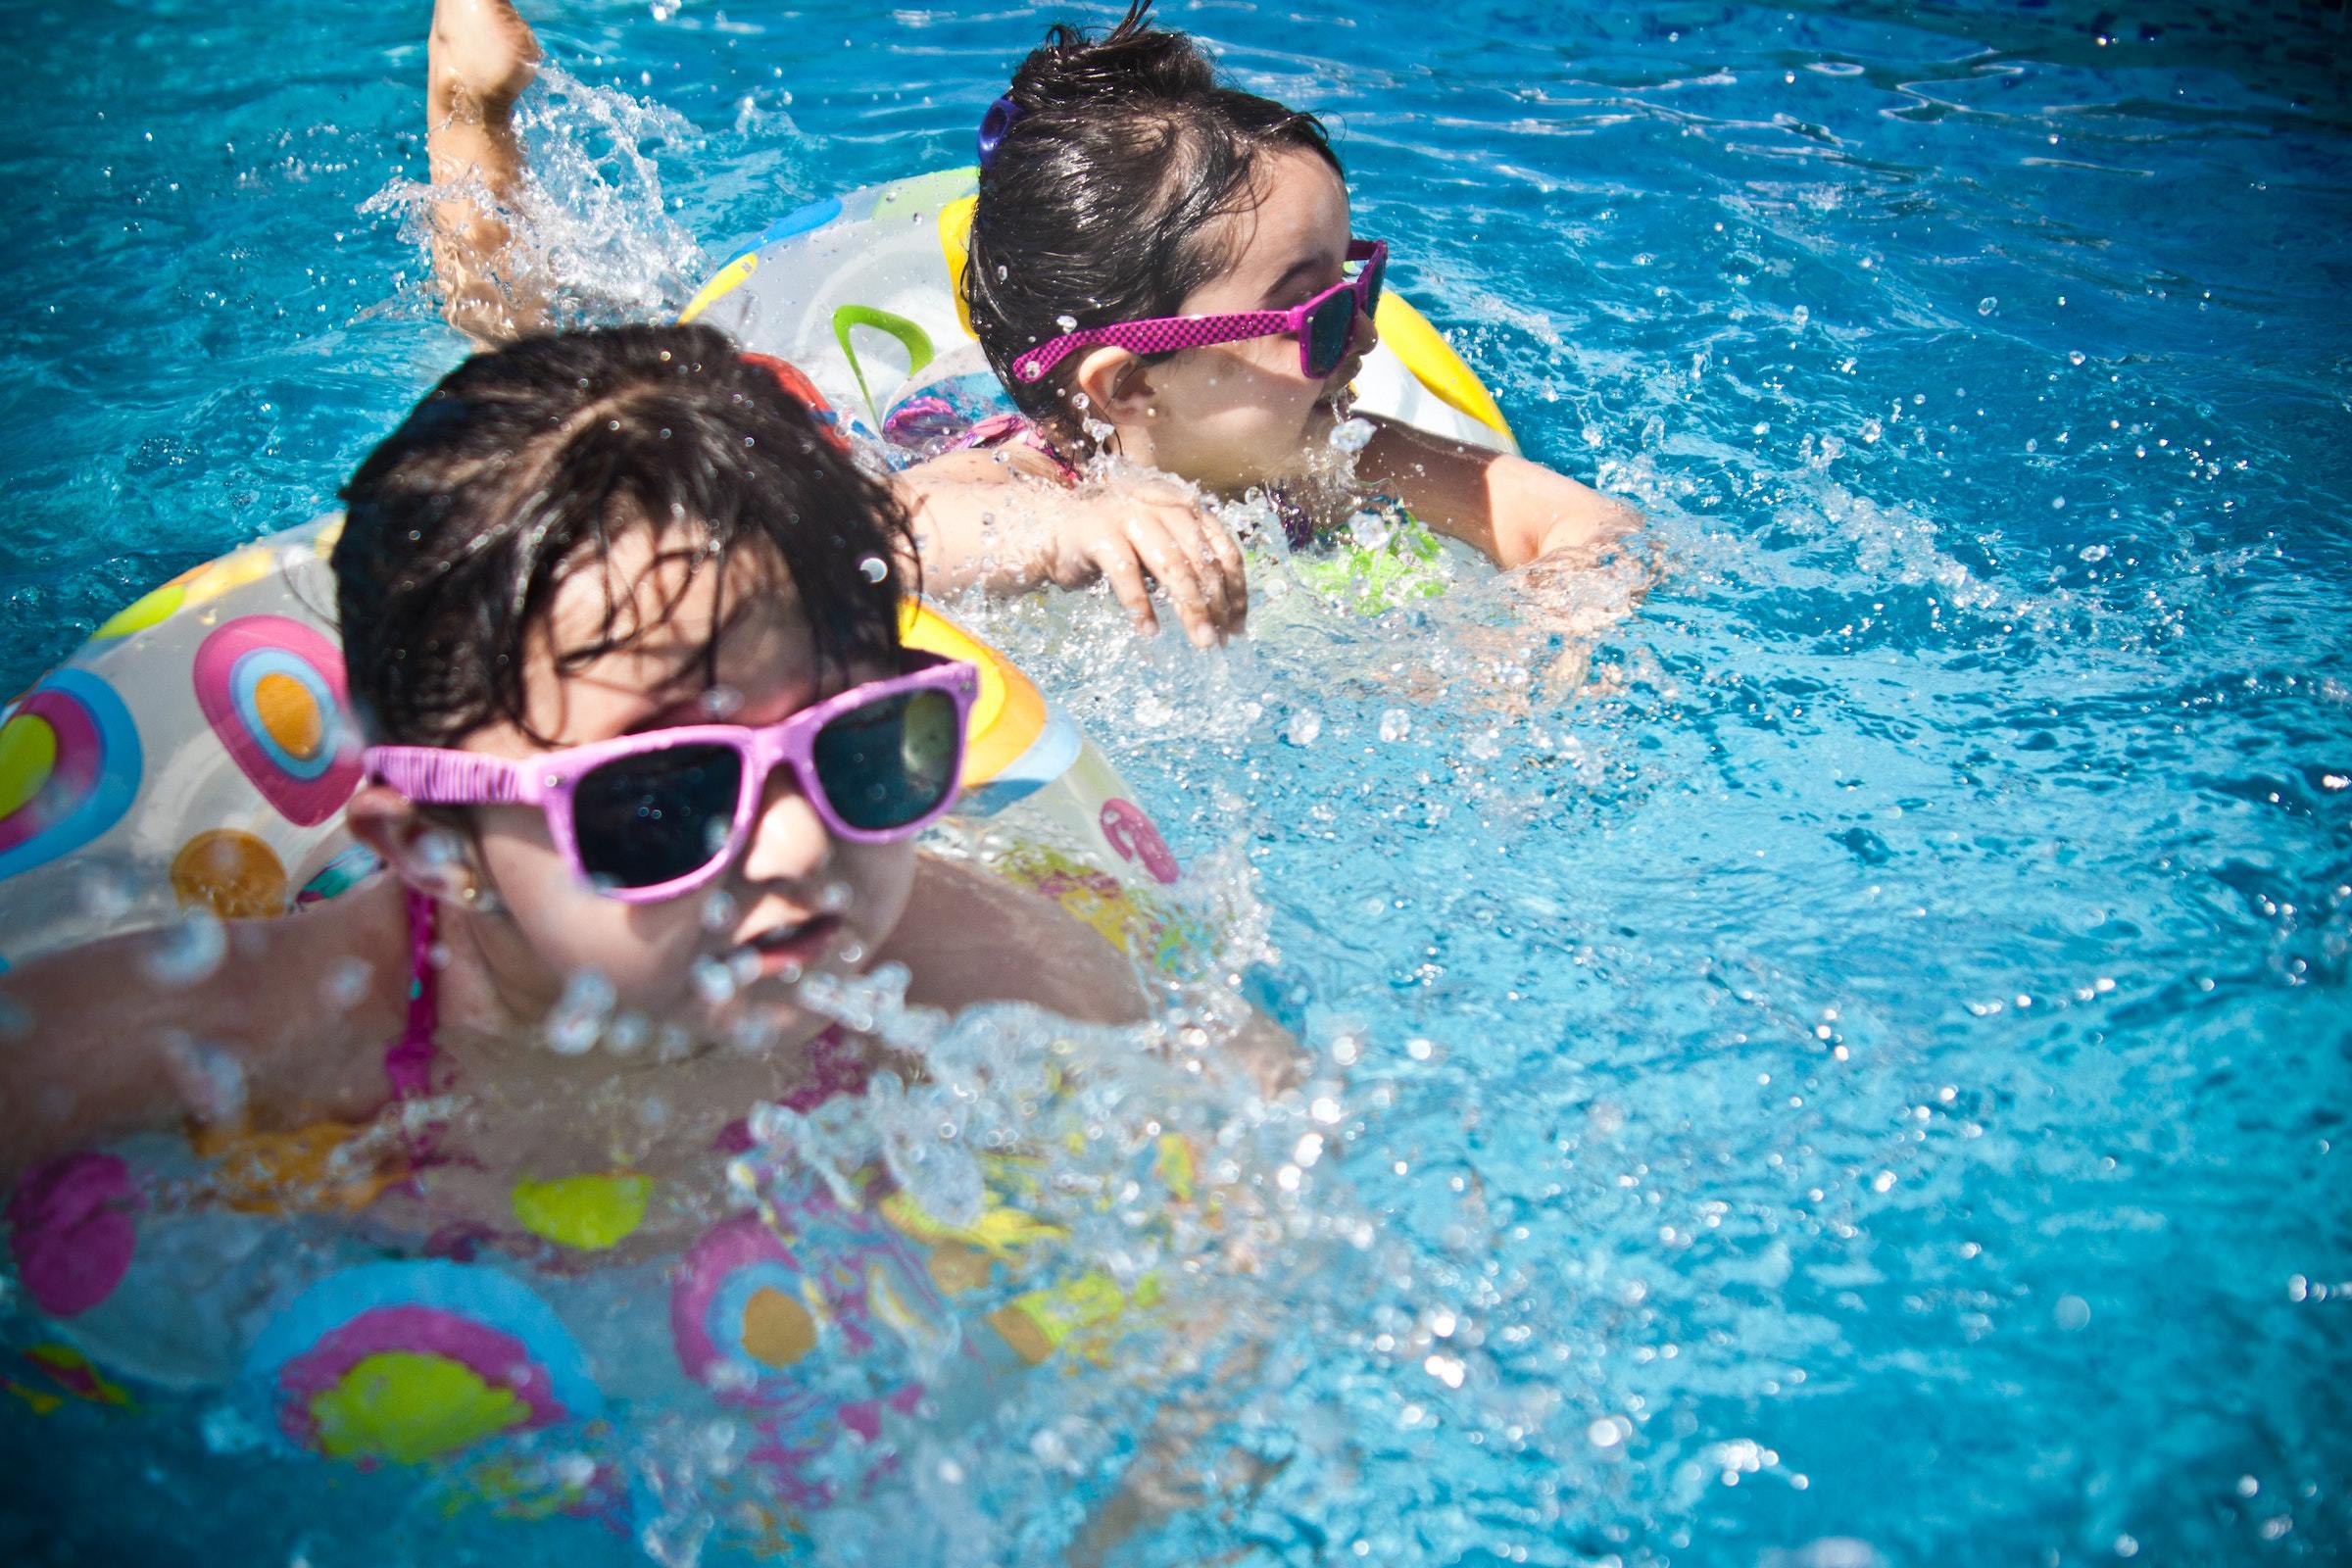 Swimming pool registration and compliance